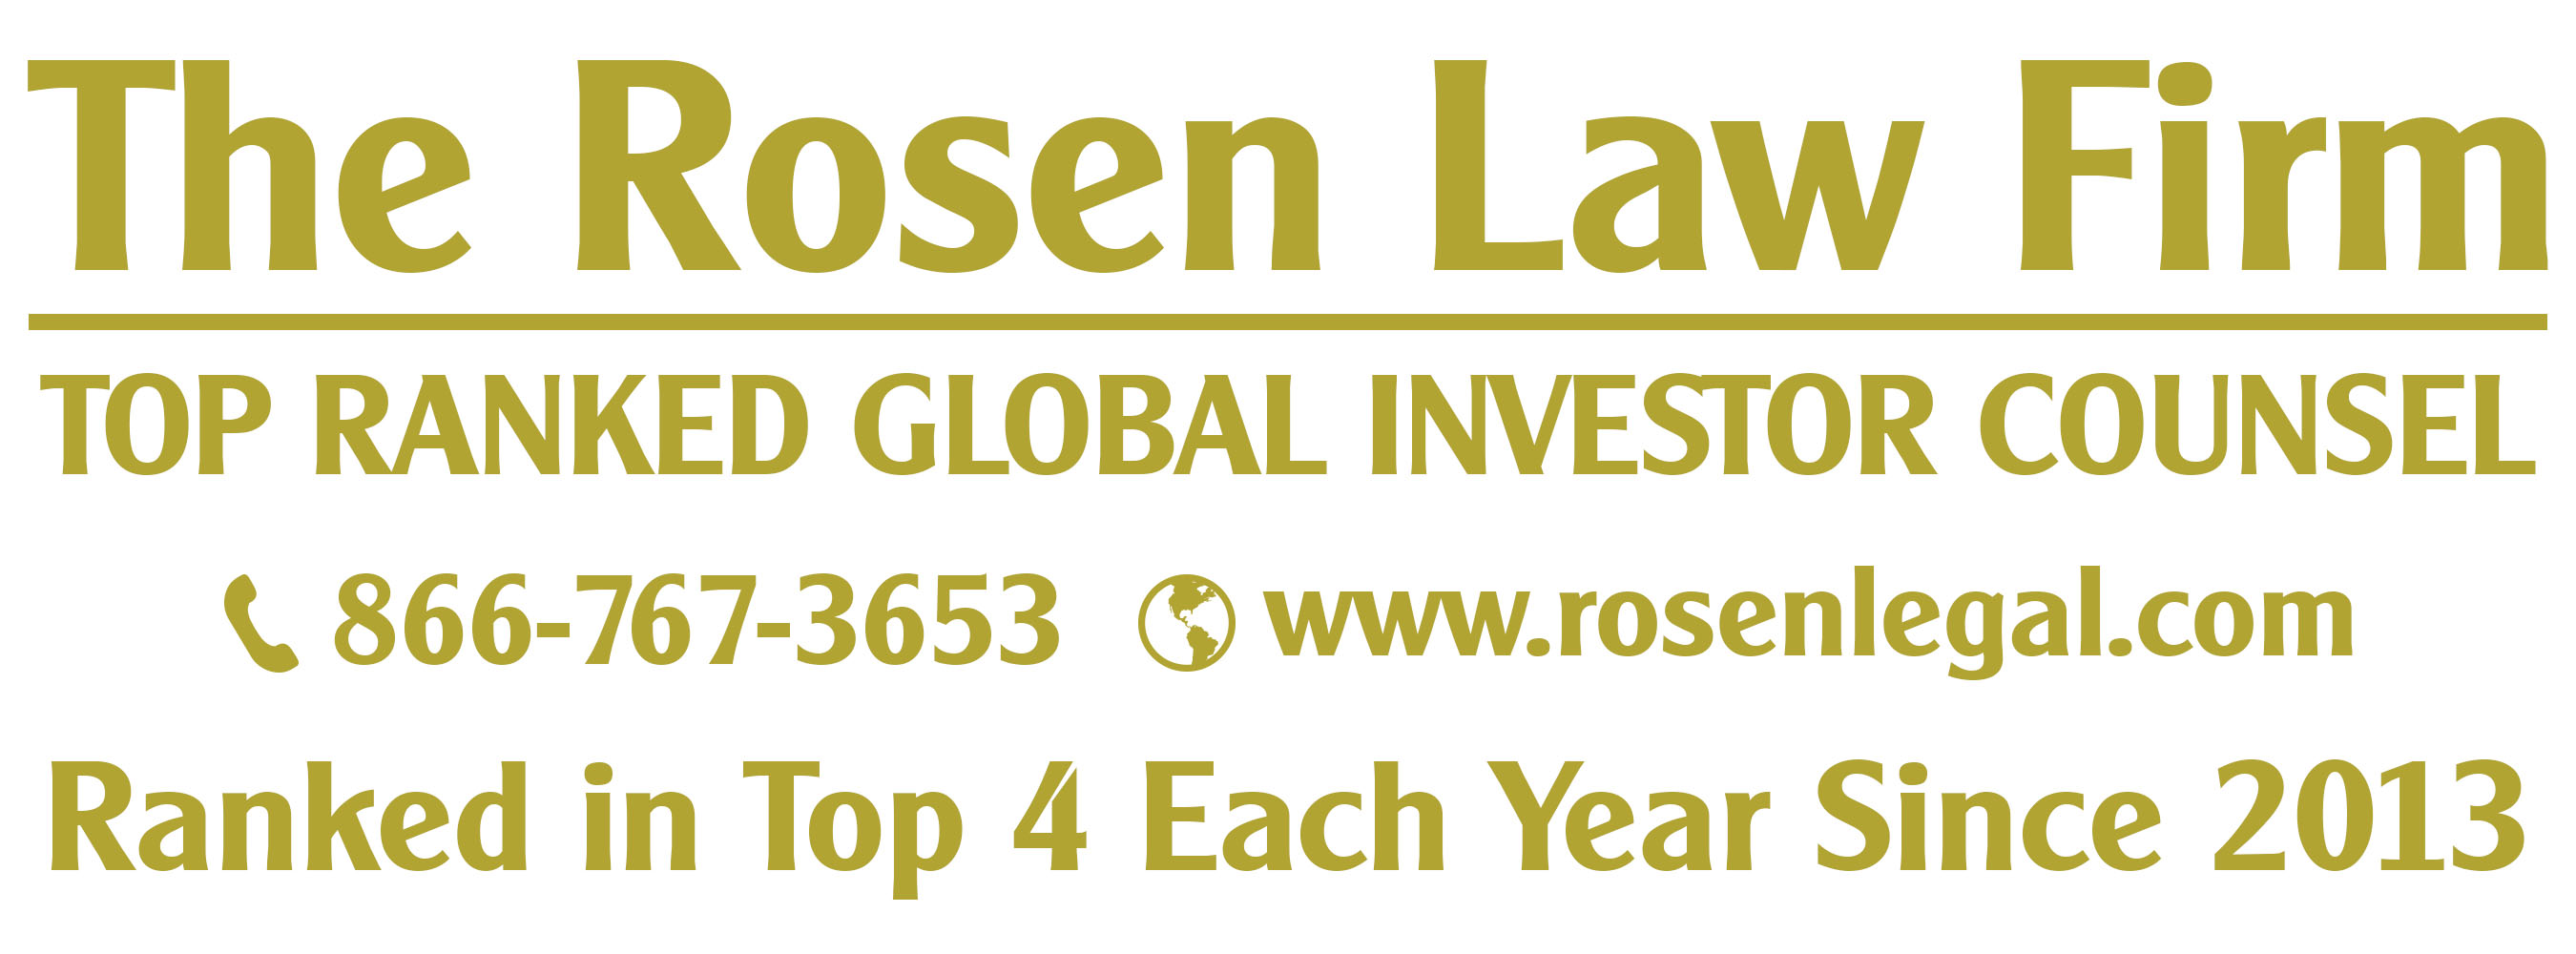 Rosen Law Firm PA, Wednesday, November 30, 2022, Press release picture